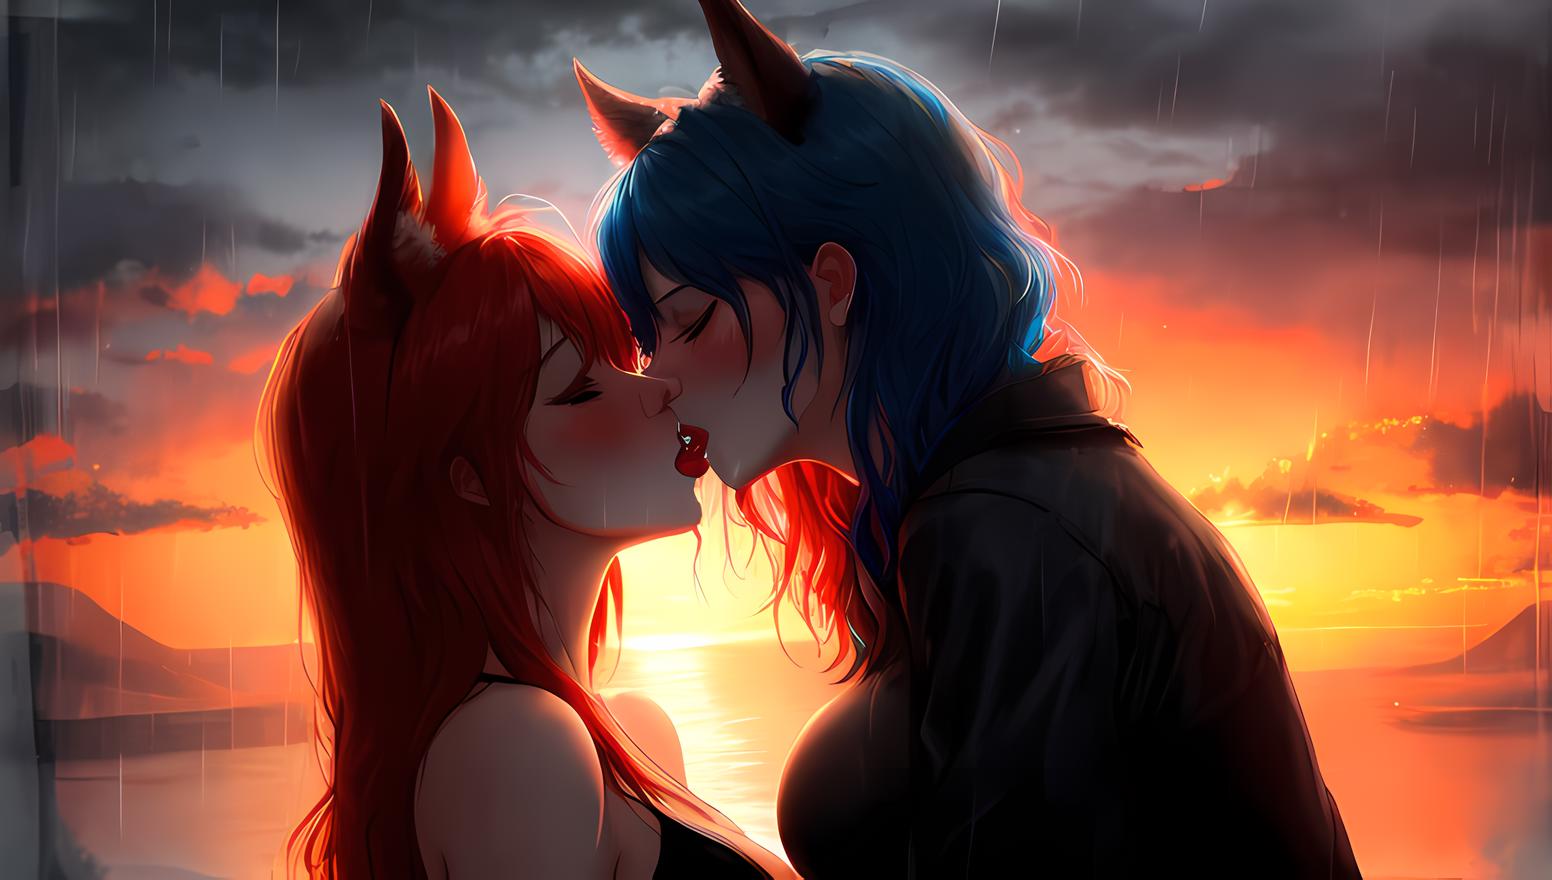 Anime Kisses image by Feral